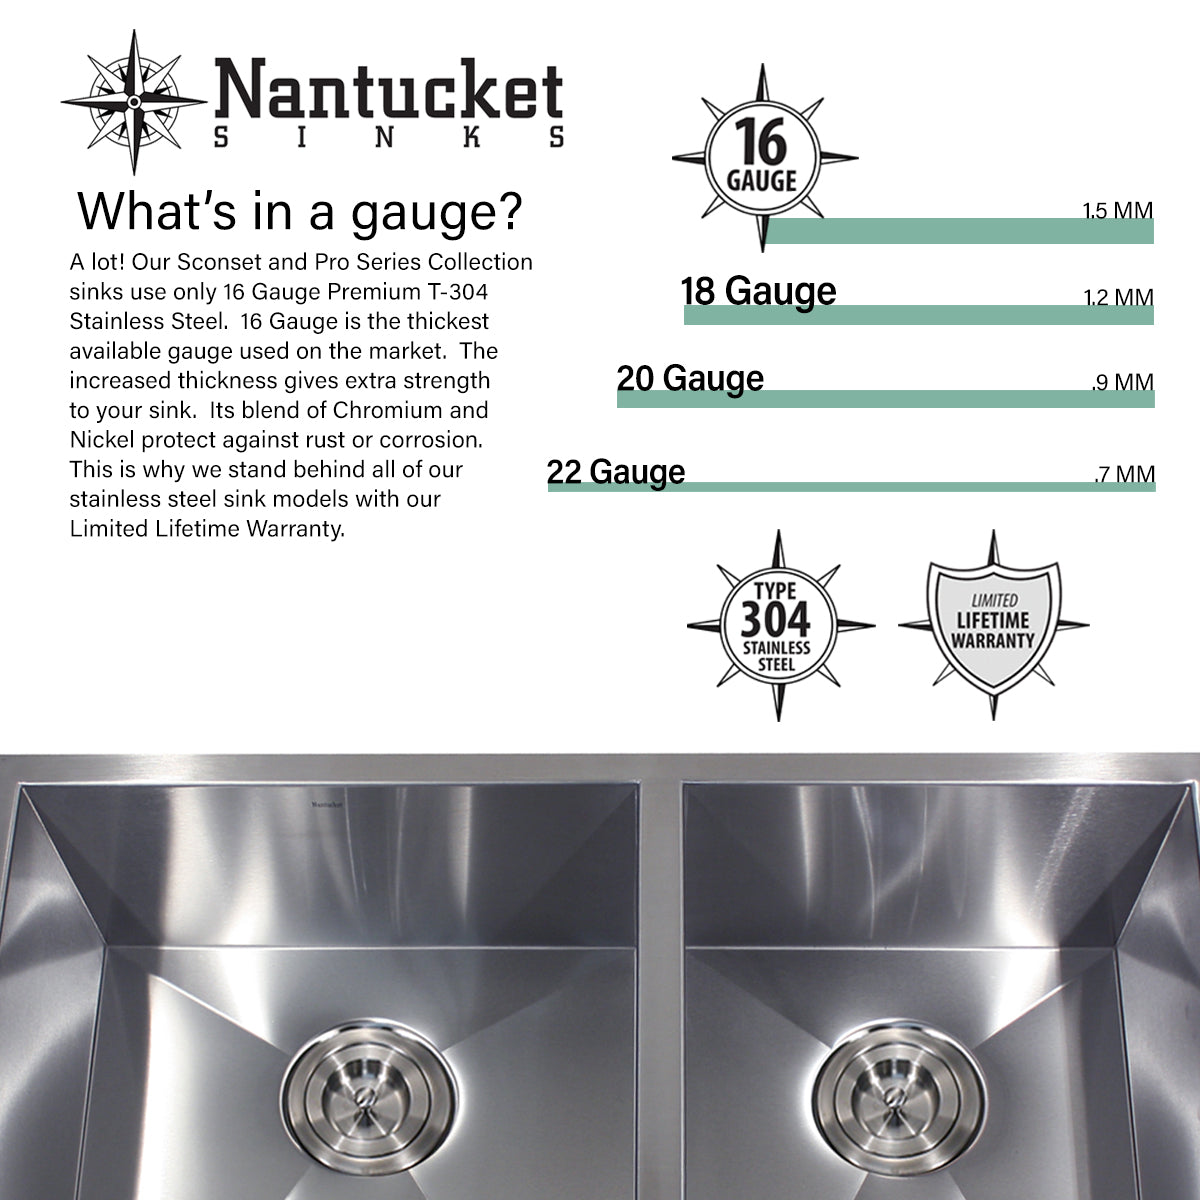 Nantucket Sinks' ZR-PS-3220-16 - 32 Inch Pro Series Large Prep Station Single Bowl Undermount Stainless Steel Kitchen Sink, With Included Rolling Mat, Grid, Colander, and Drain.